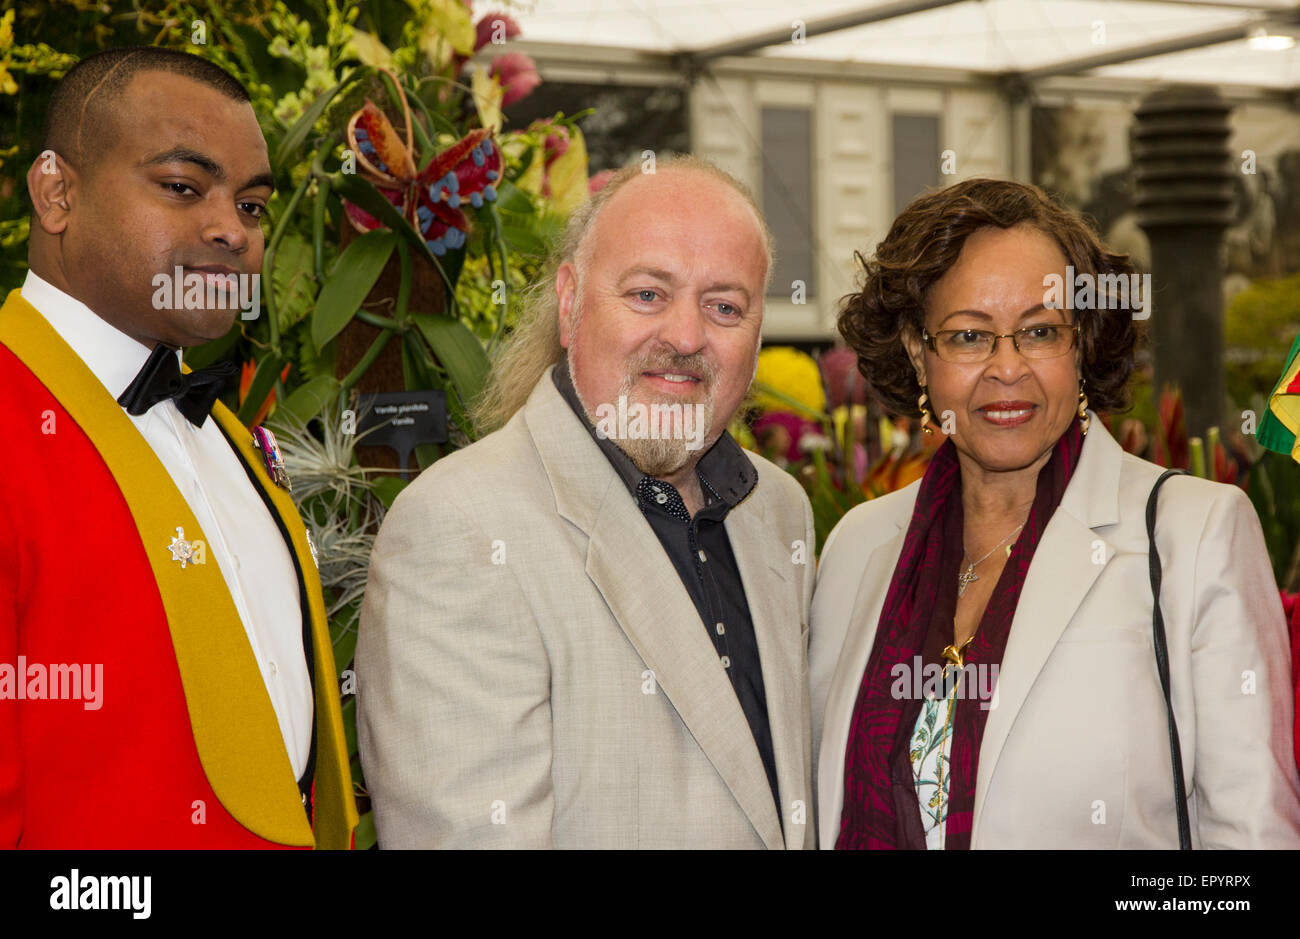 Dr Johnson Beharry VC and Bill Bailey at the RHS Chelsea Flower Show 2015 Stock Photo